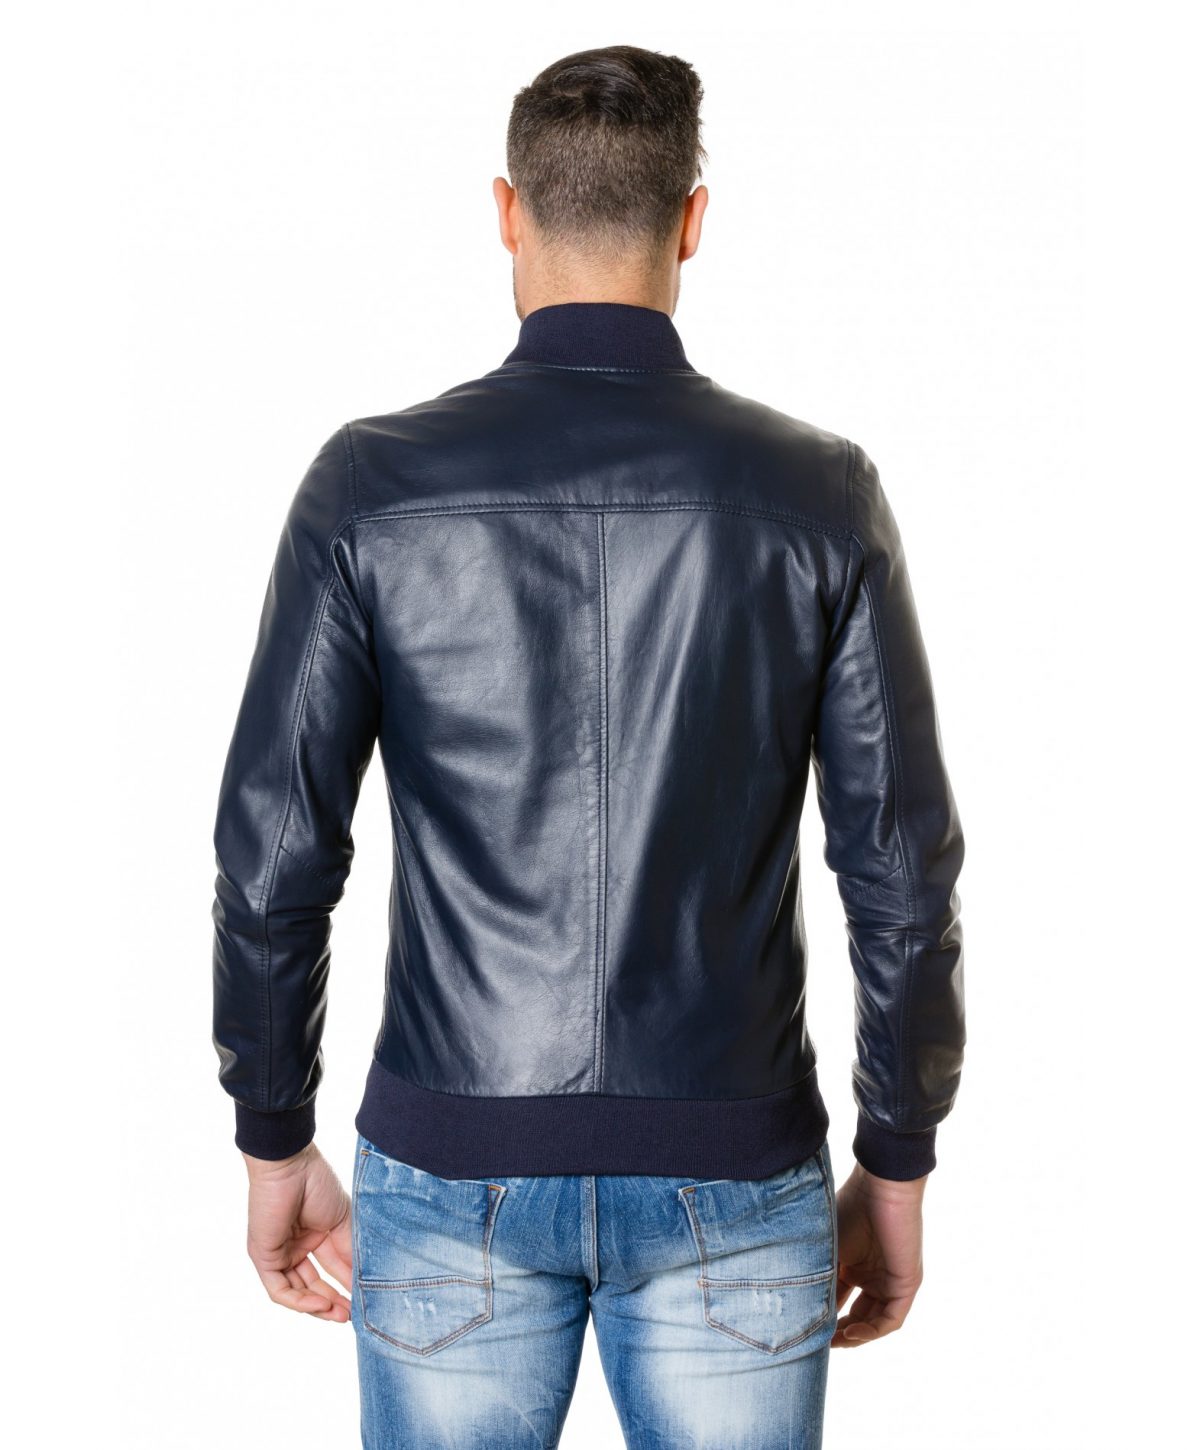 Blue Colour Leather Bomber Jacket Smooth Aspect